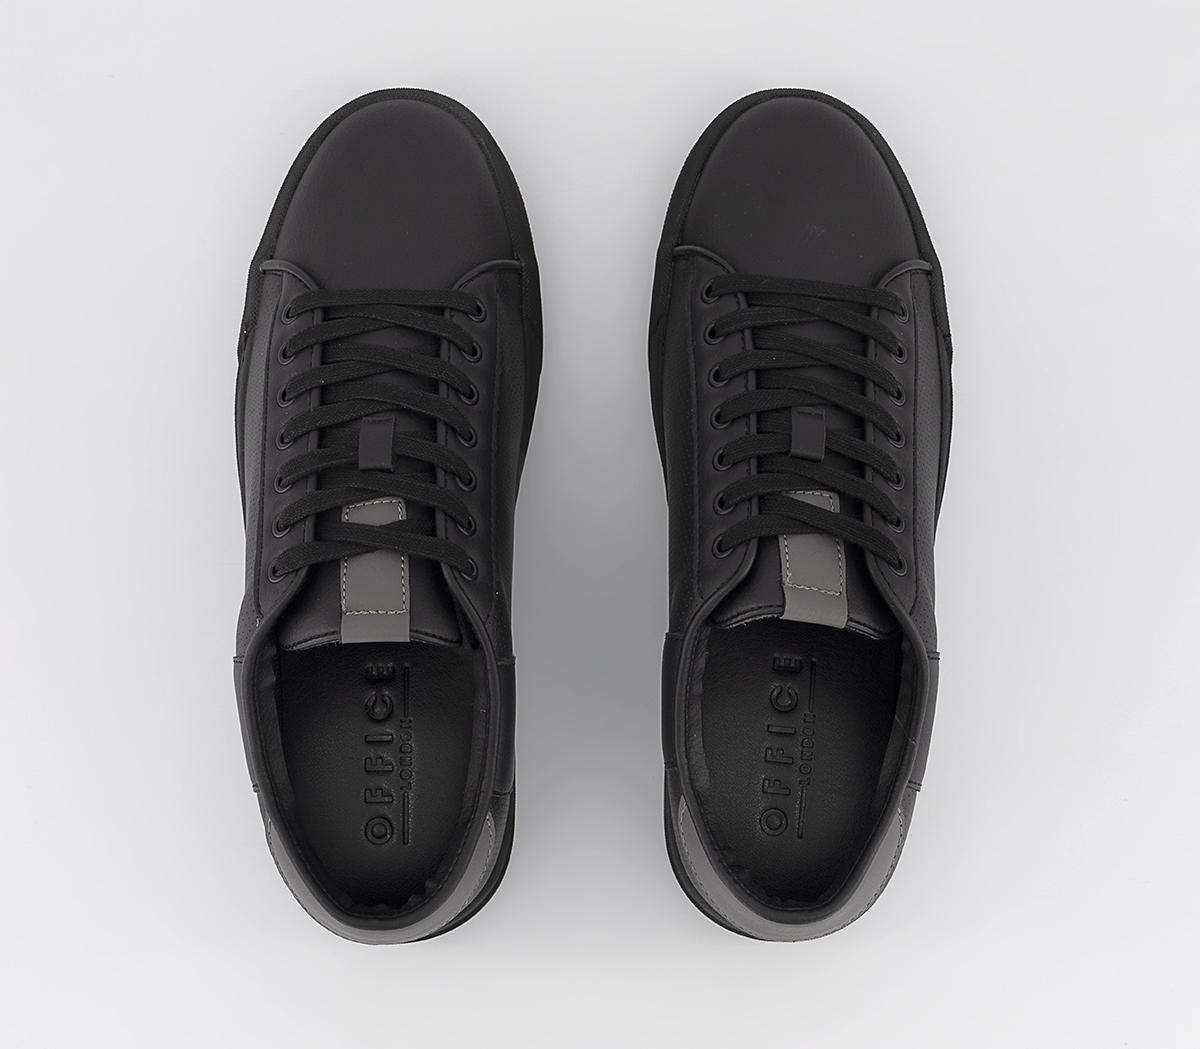 OFFICE Camber Back Tab Colour Block Sneakers Black - Men's Casual Shoes